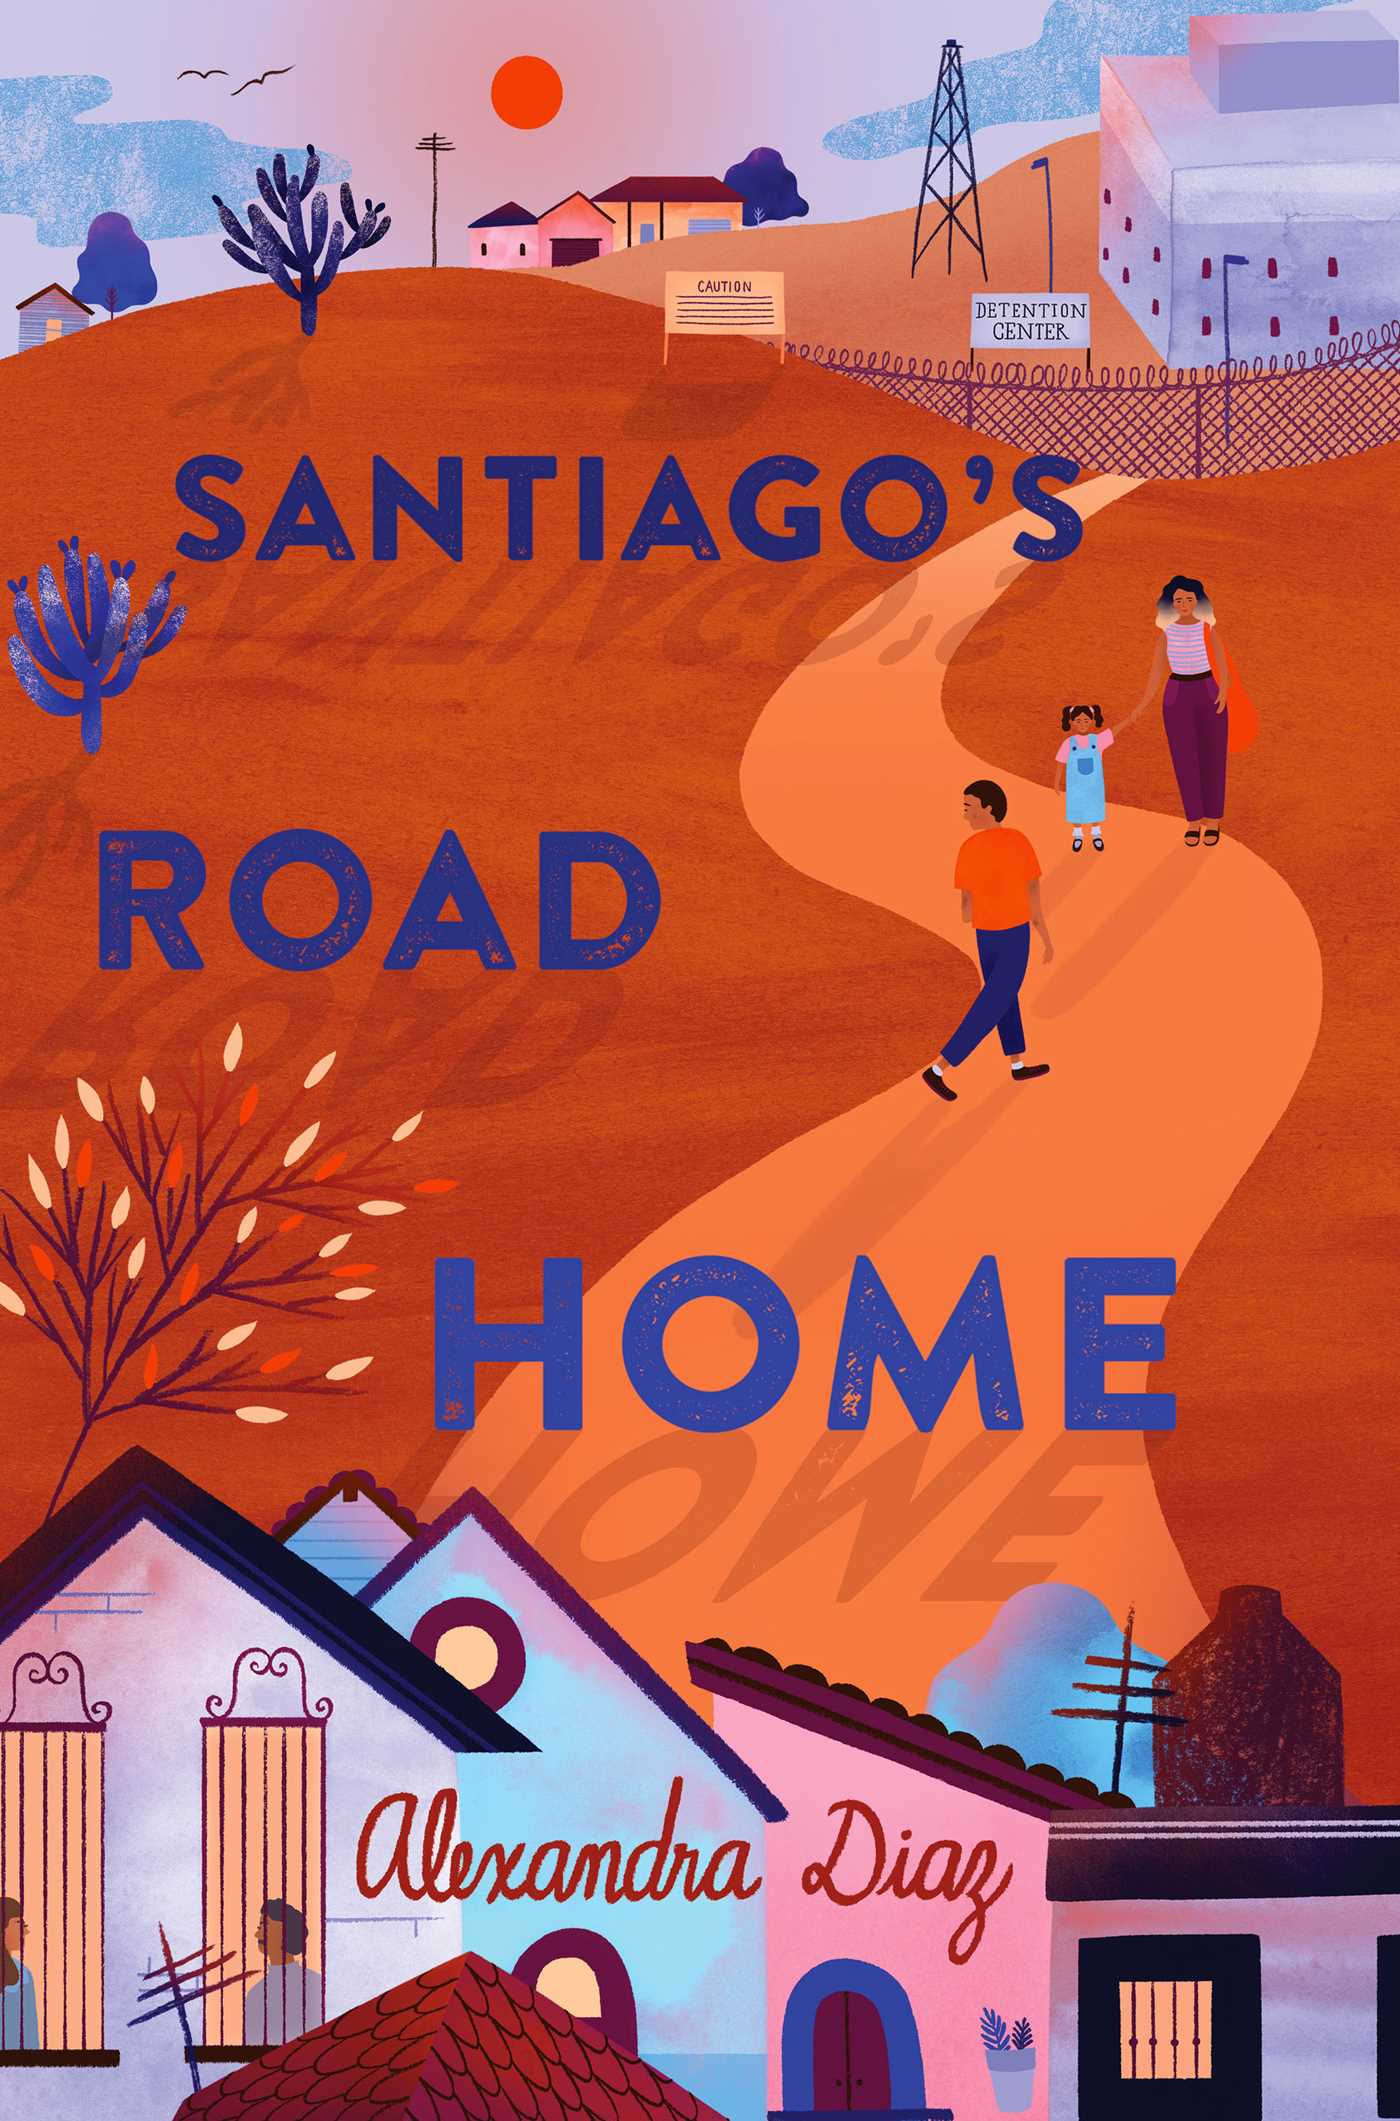 Image for "Santiago's Road Home"